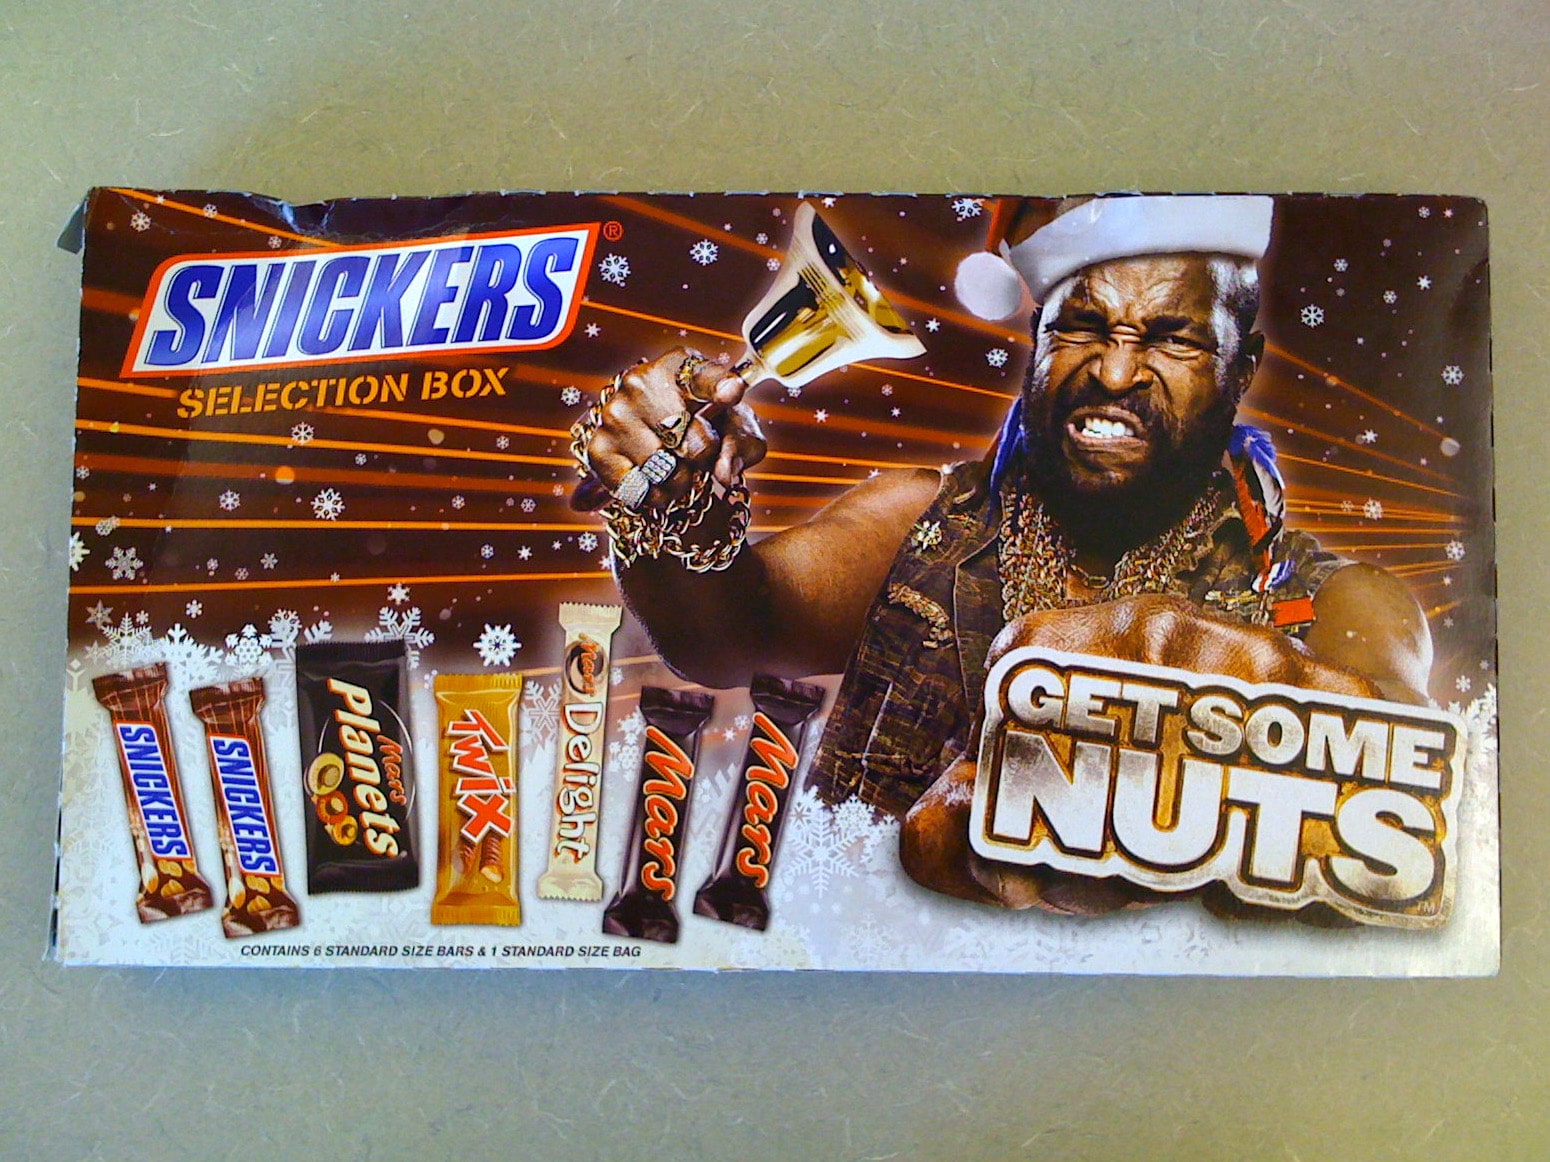 “Get Some Nuts!” (Snickers)